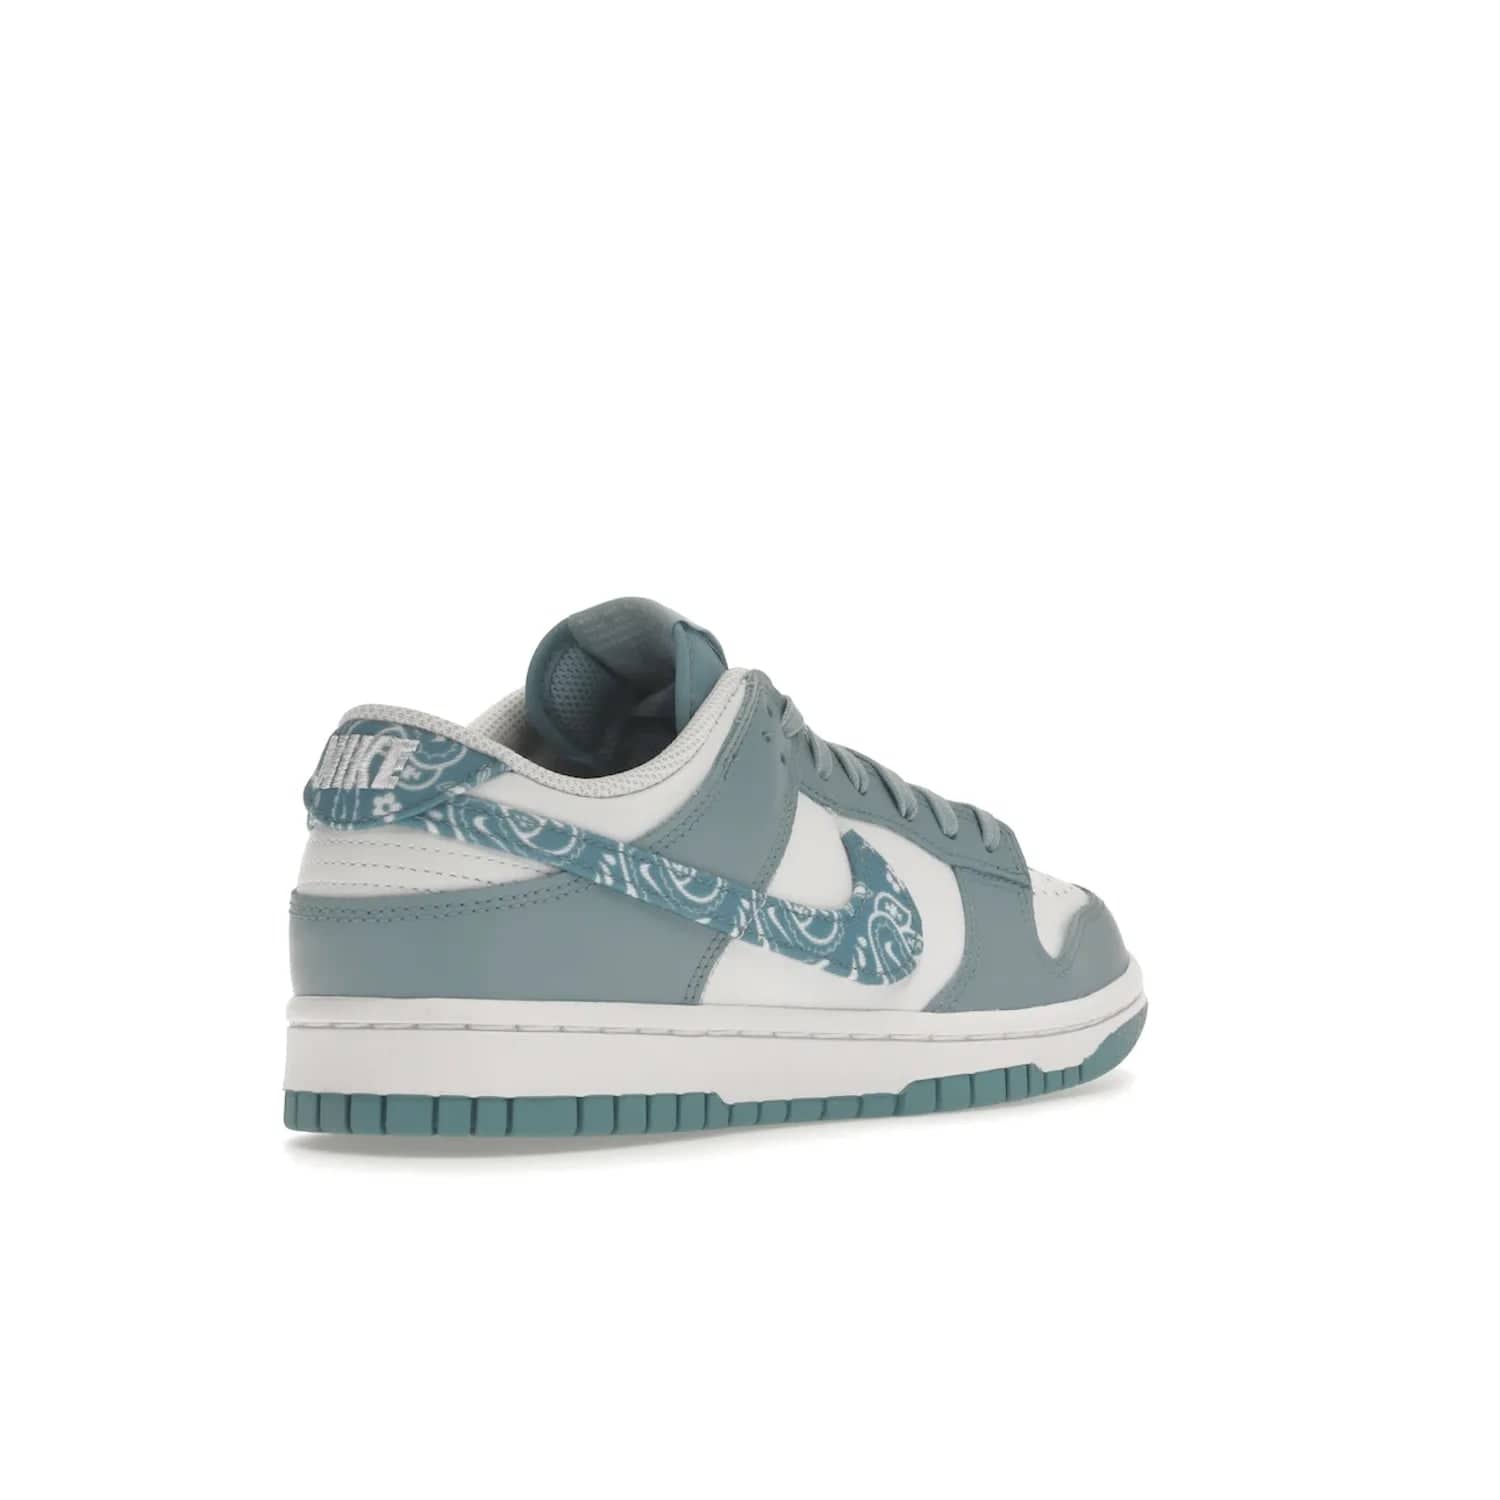 Nike Dunk Low Essential Paisley Pack Worn Blue (Women's) - Image 32 - Only at www.BallersClubKickz.com - Get the Nike Dunk Low Essential Paisley Pack Worn Blue (Women's) for style and comfort. White leather construction, light blue leather overlays, canvas Swooshes and matching heel tabs offer a rich blue hue. Finished by a white and light blue sole, this classic Nike Dunk is the perfect addition to any wardrobe. Released in March 2022.